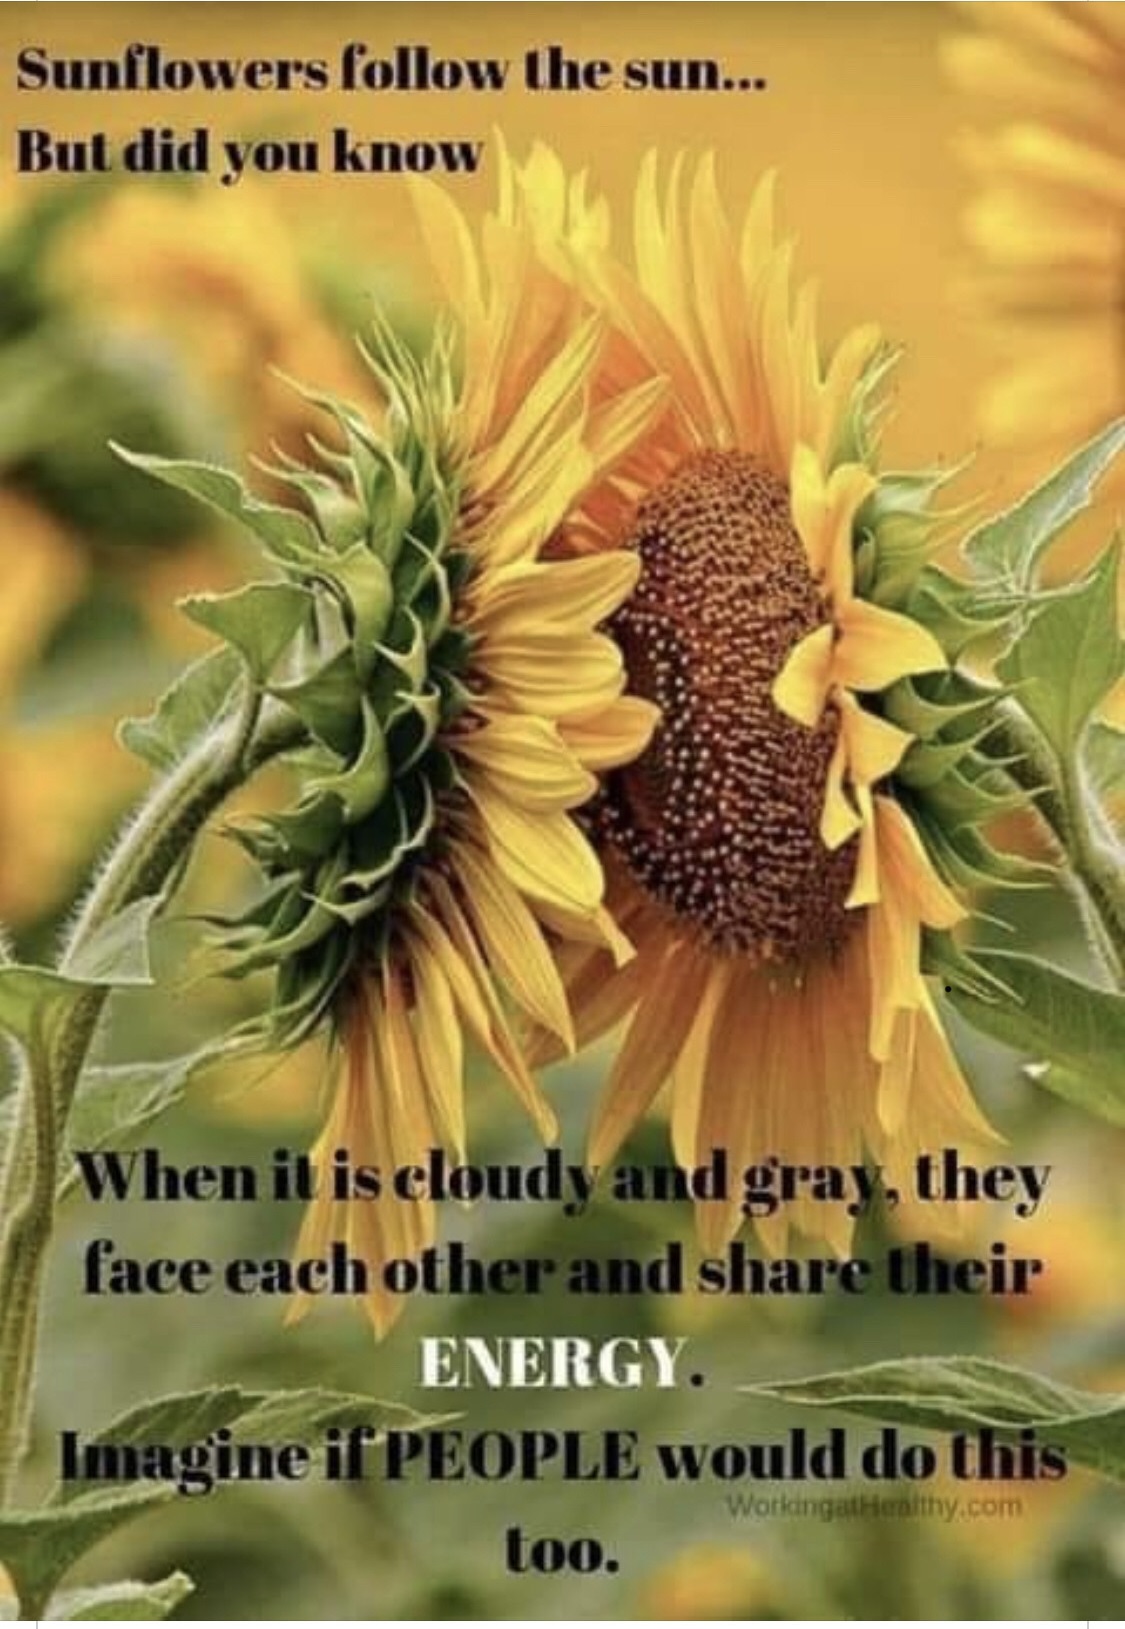 kissing sunflowers - Sunflowers the sun... But did you know When it is cloudy and gray, they face each other and their Energy. Imagine if People would do this Working Healthy.com too.